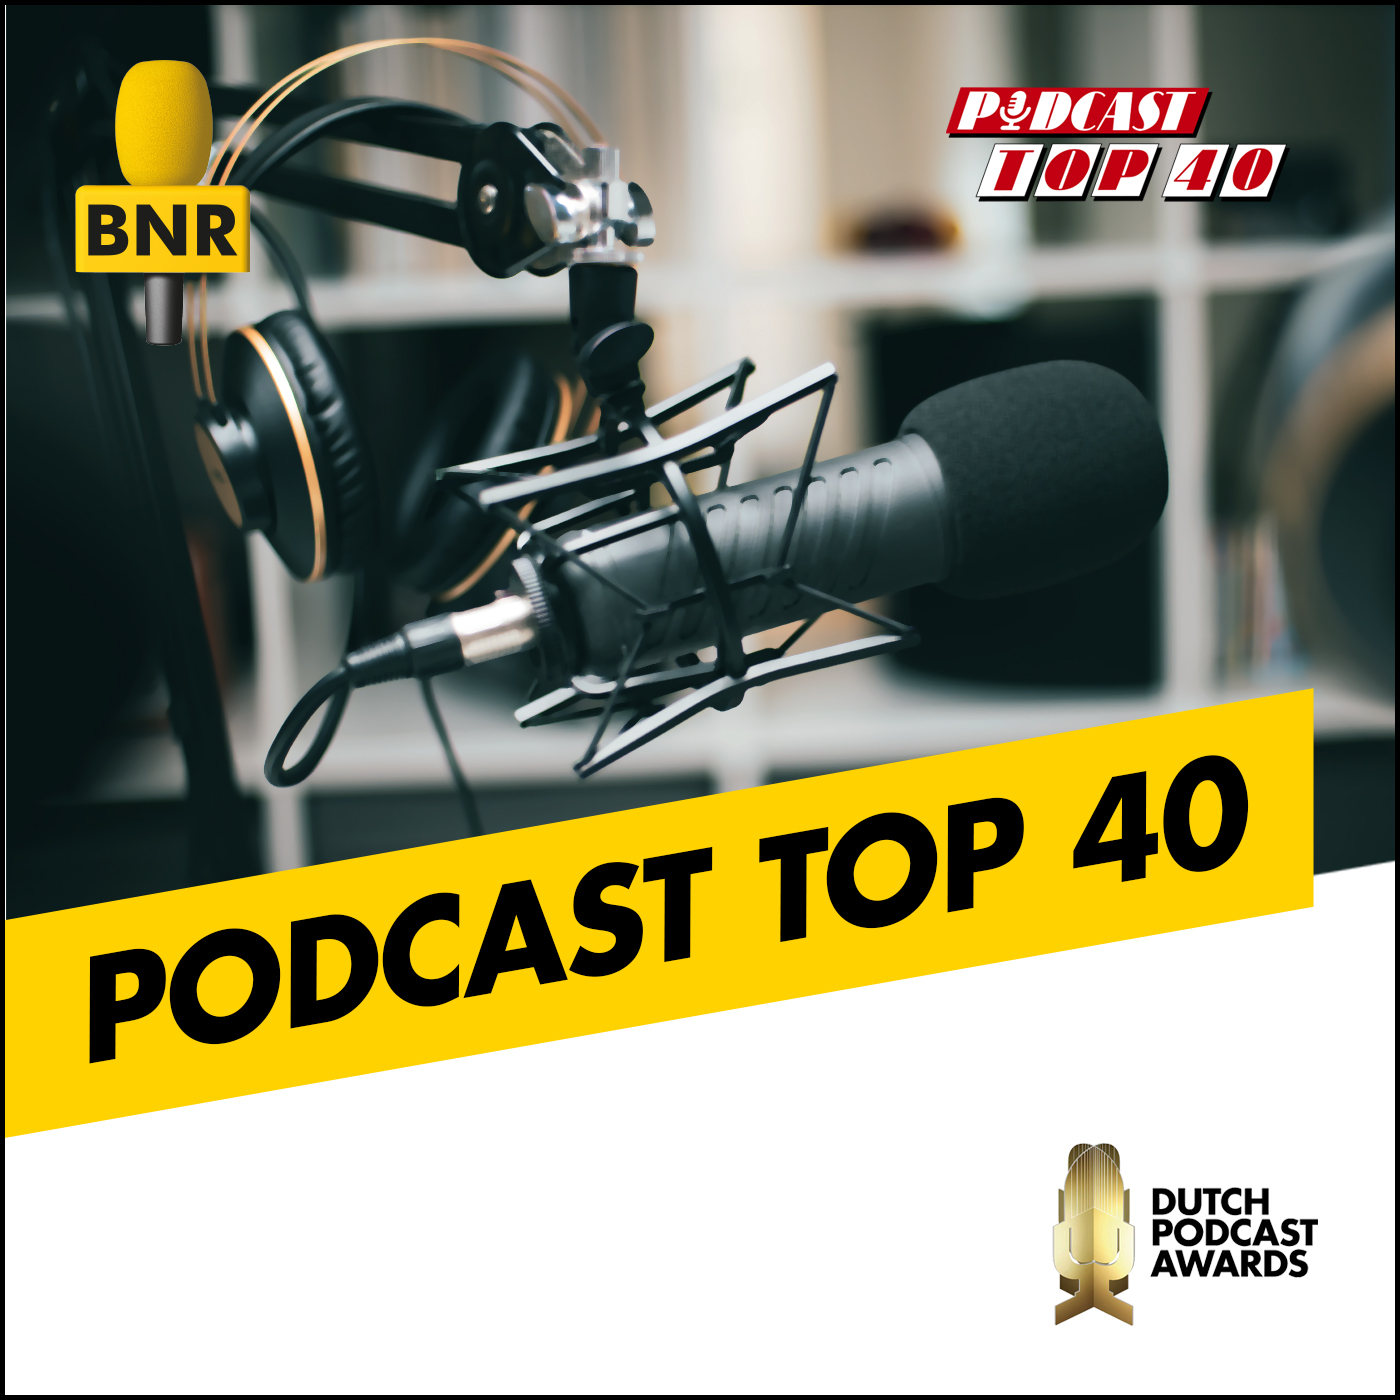 Podcast Top 40